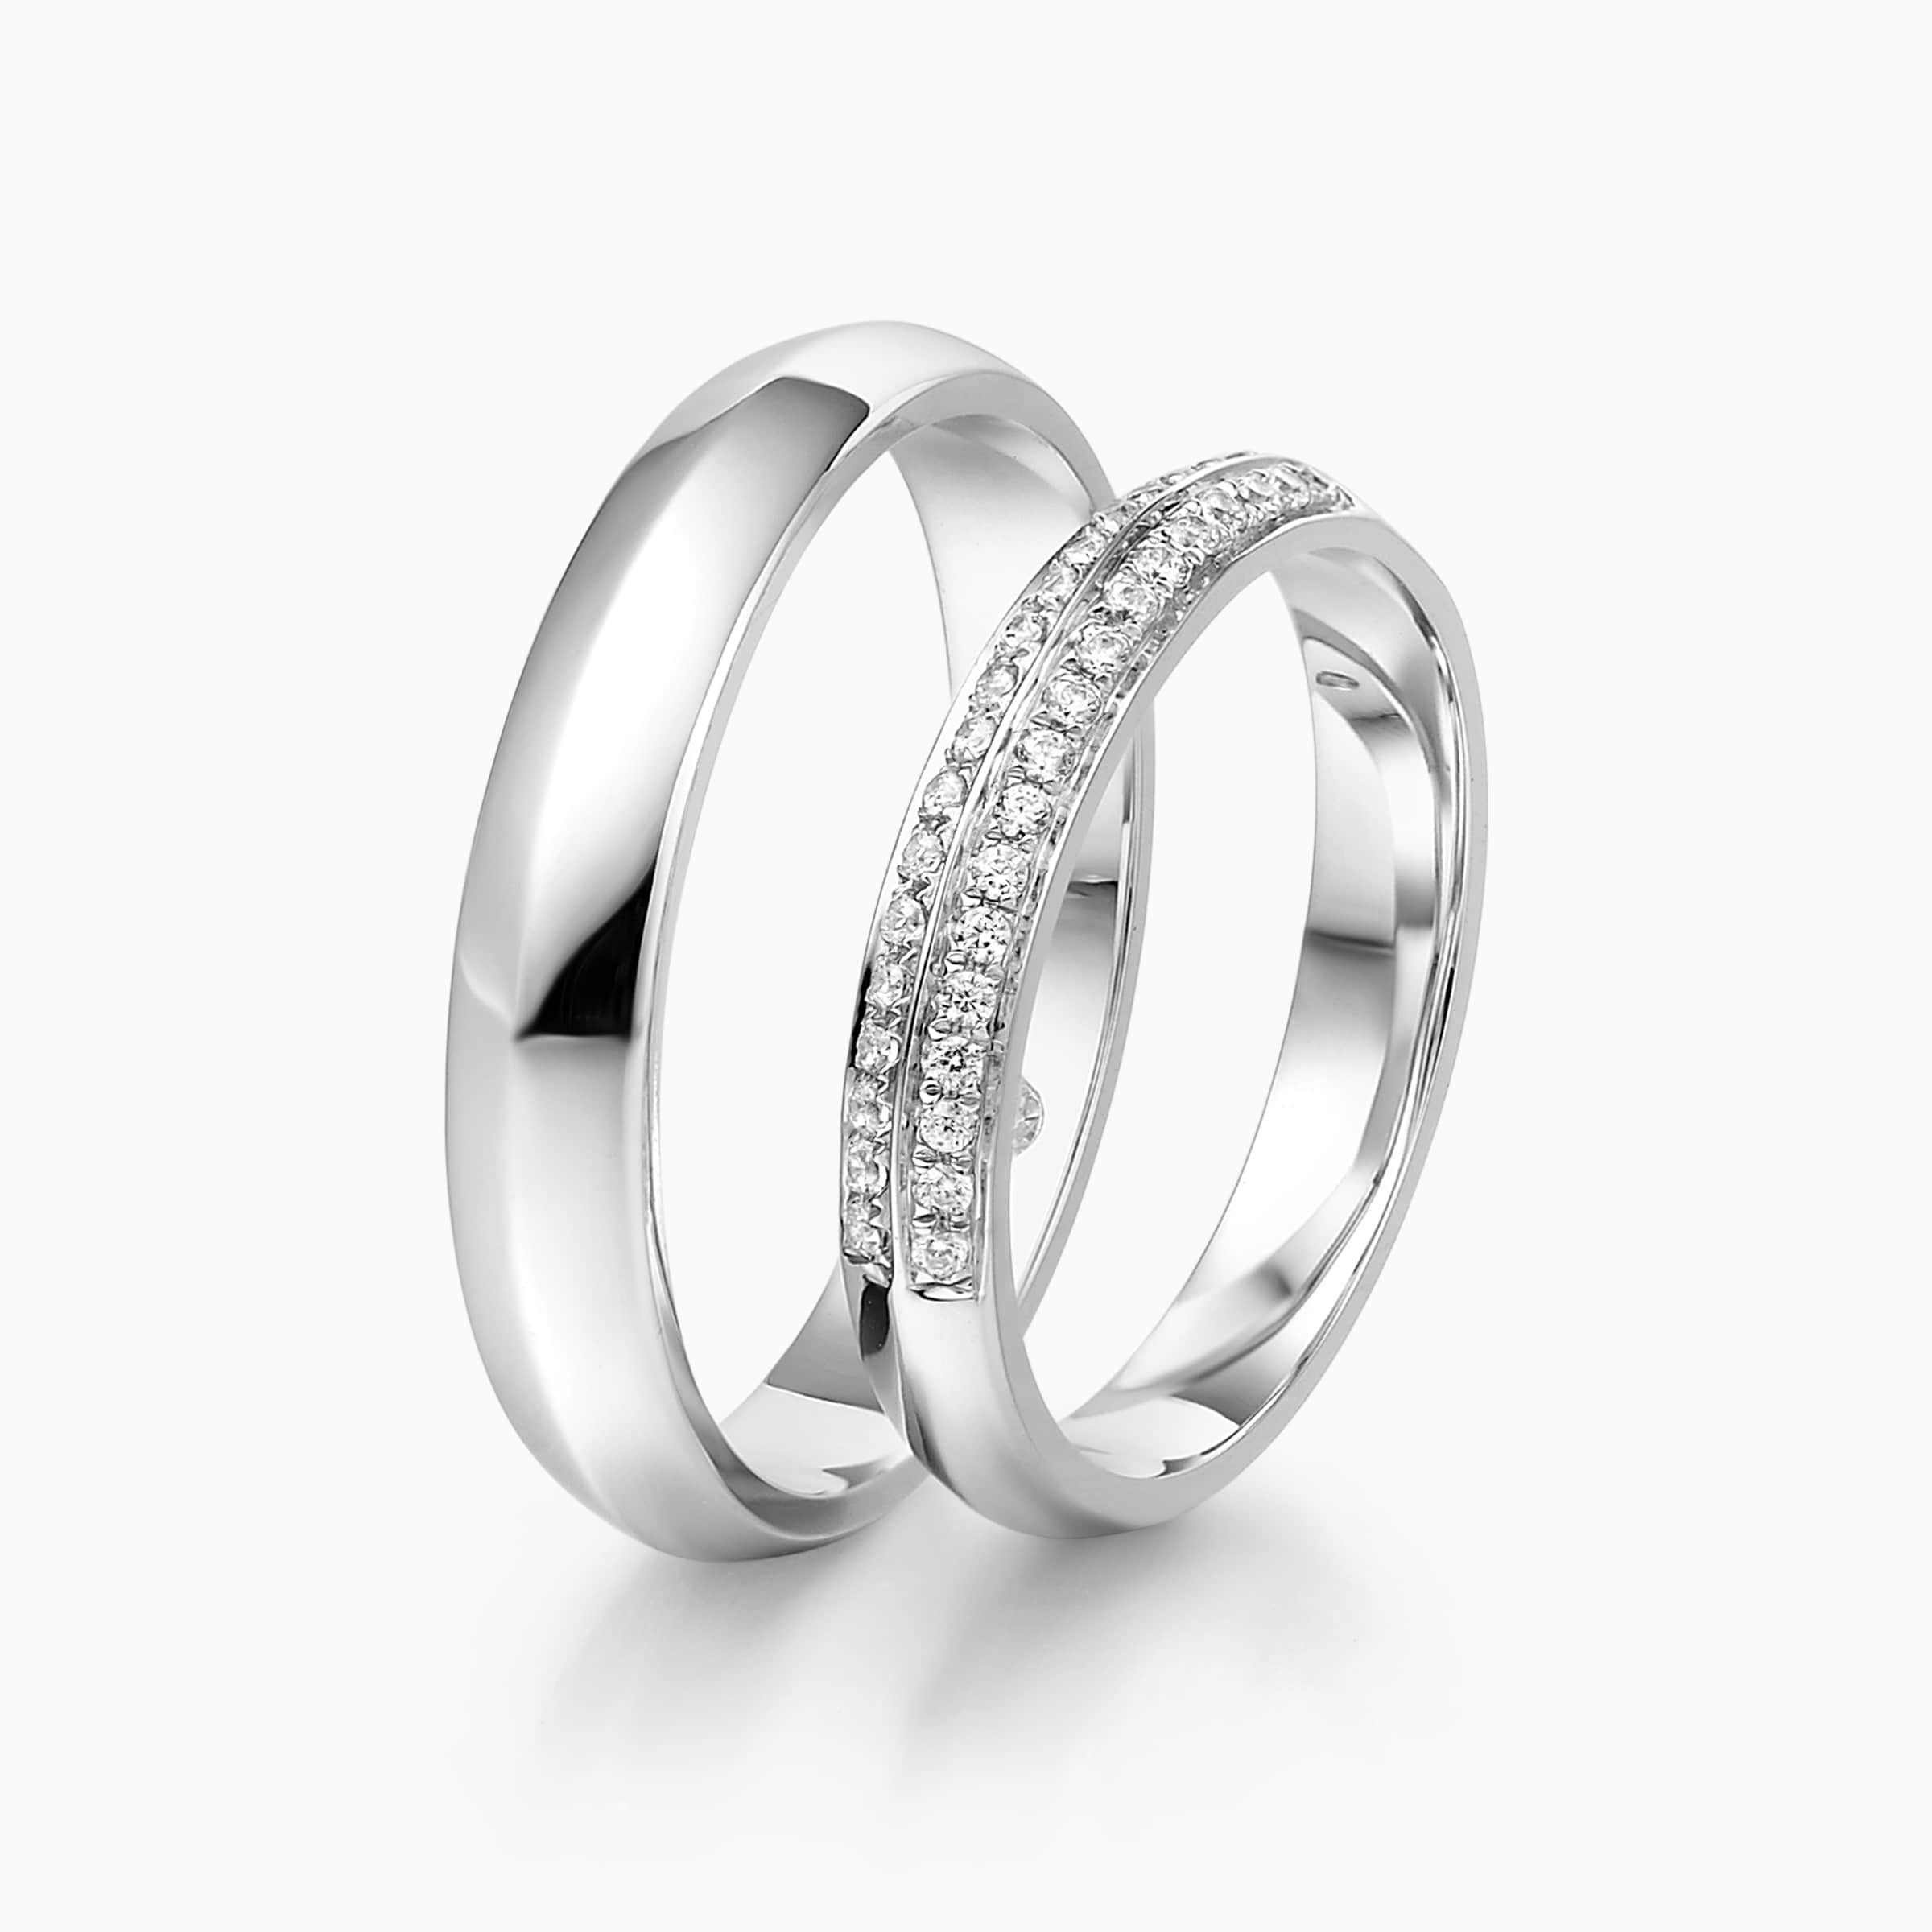 Darry Ring double row wedding bands